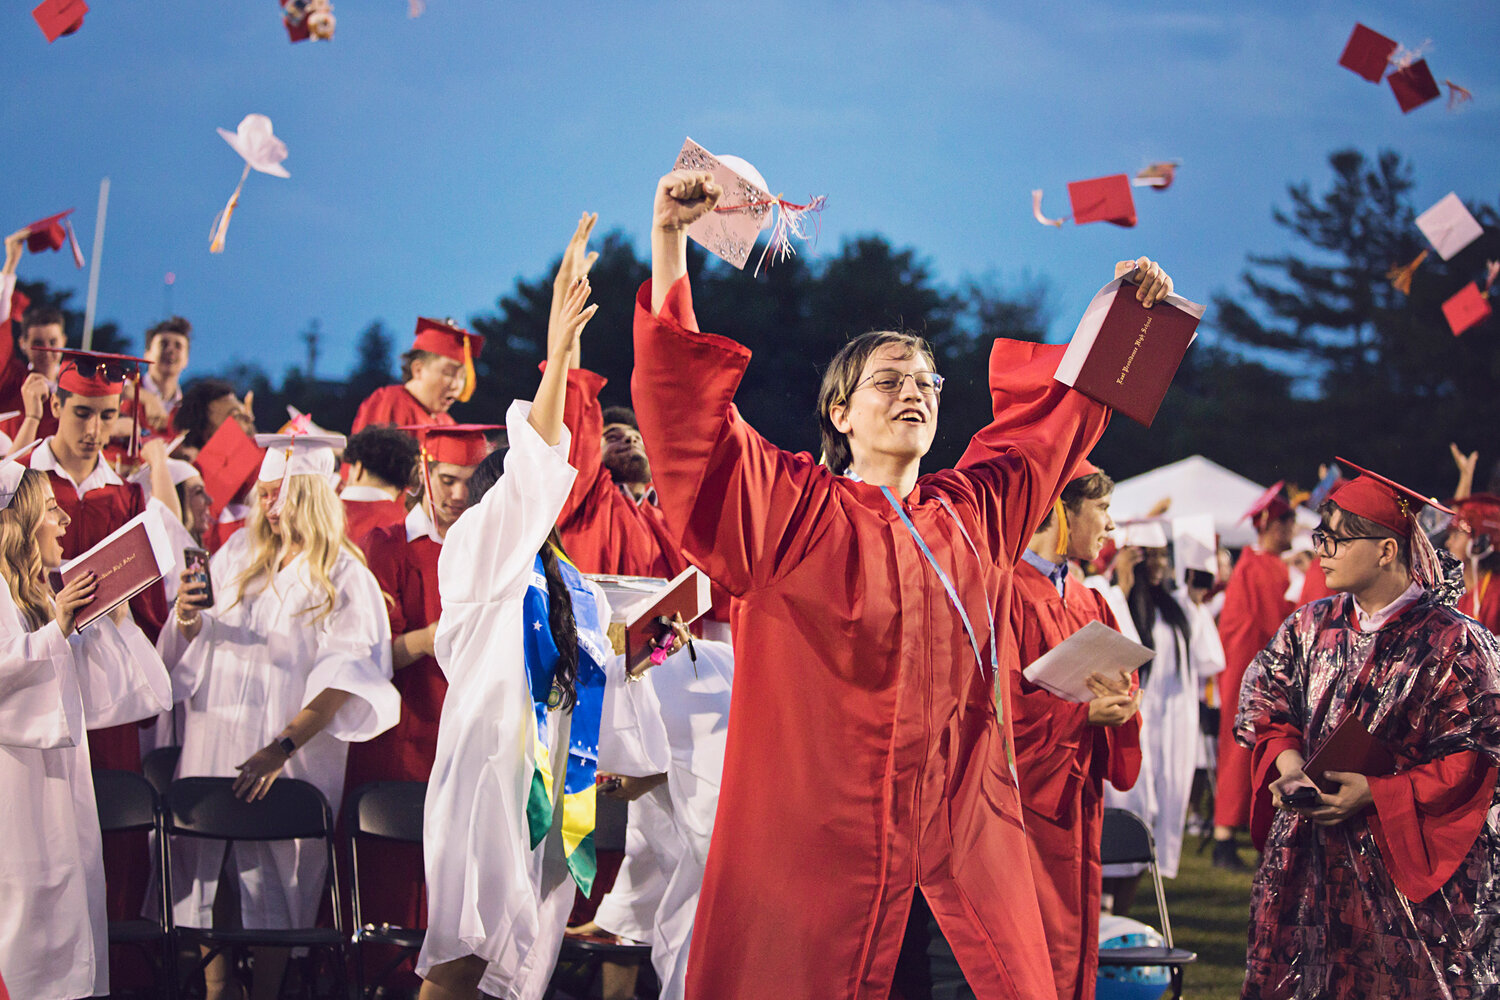 Julie Furtado
Tyler Anctil raises his arm as he and his classmates celebrate at the end of the East Providence High School commencement exercises for the Class of 2023 Friday evening, June 2, at Pierce Memorial Stadium.